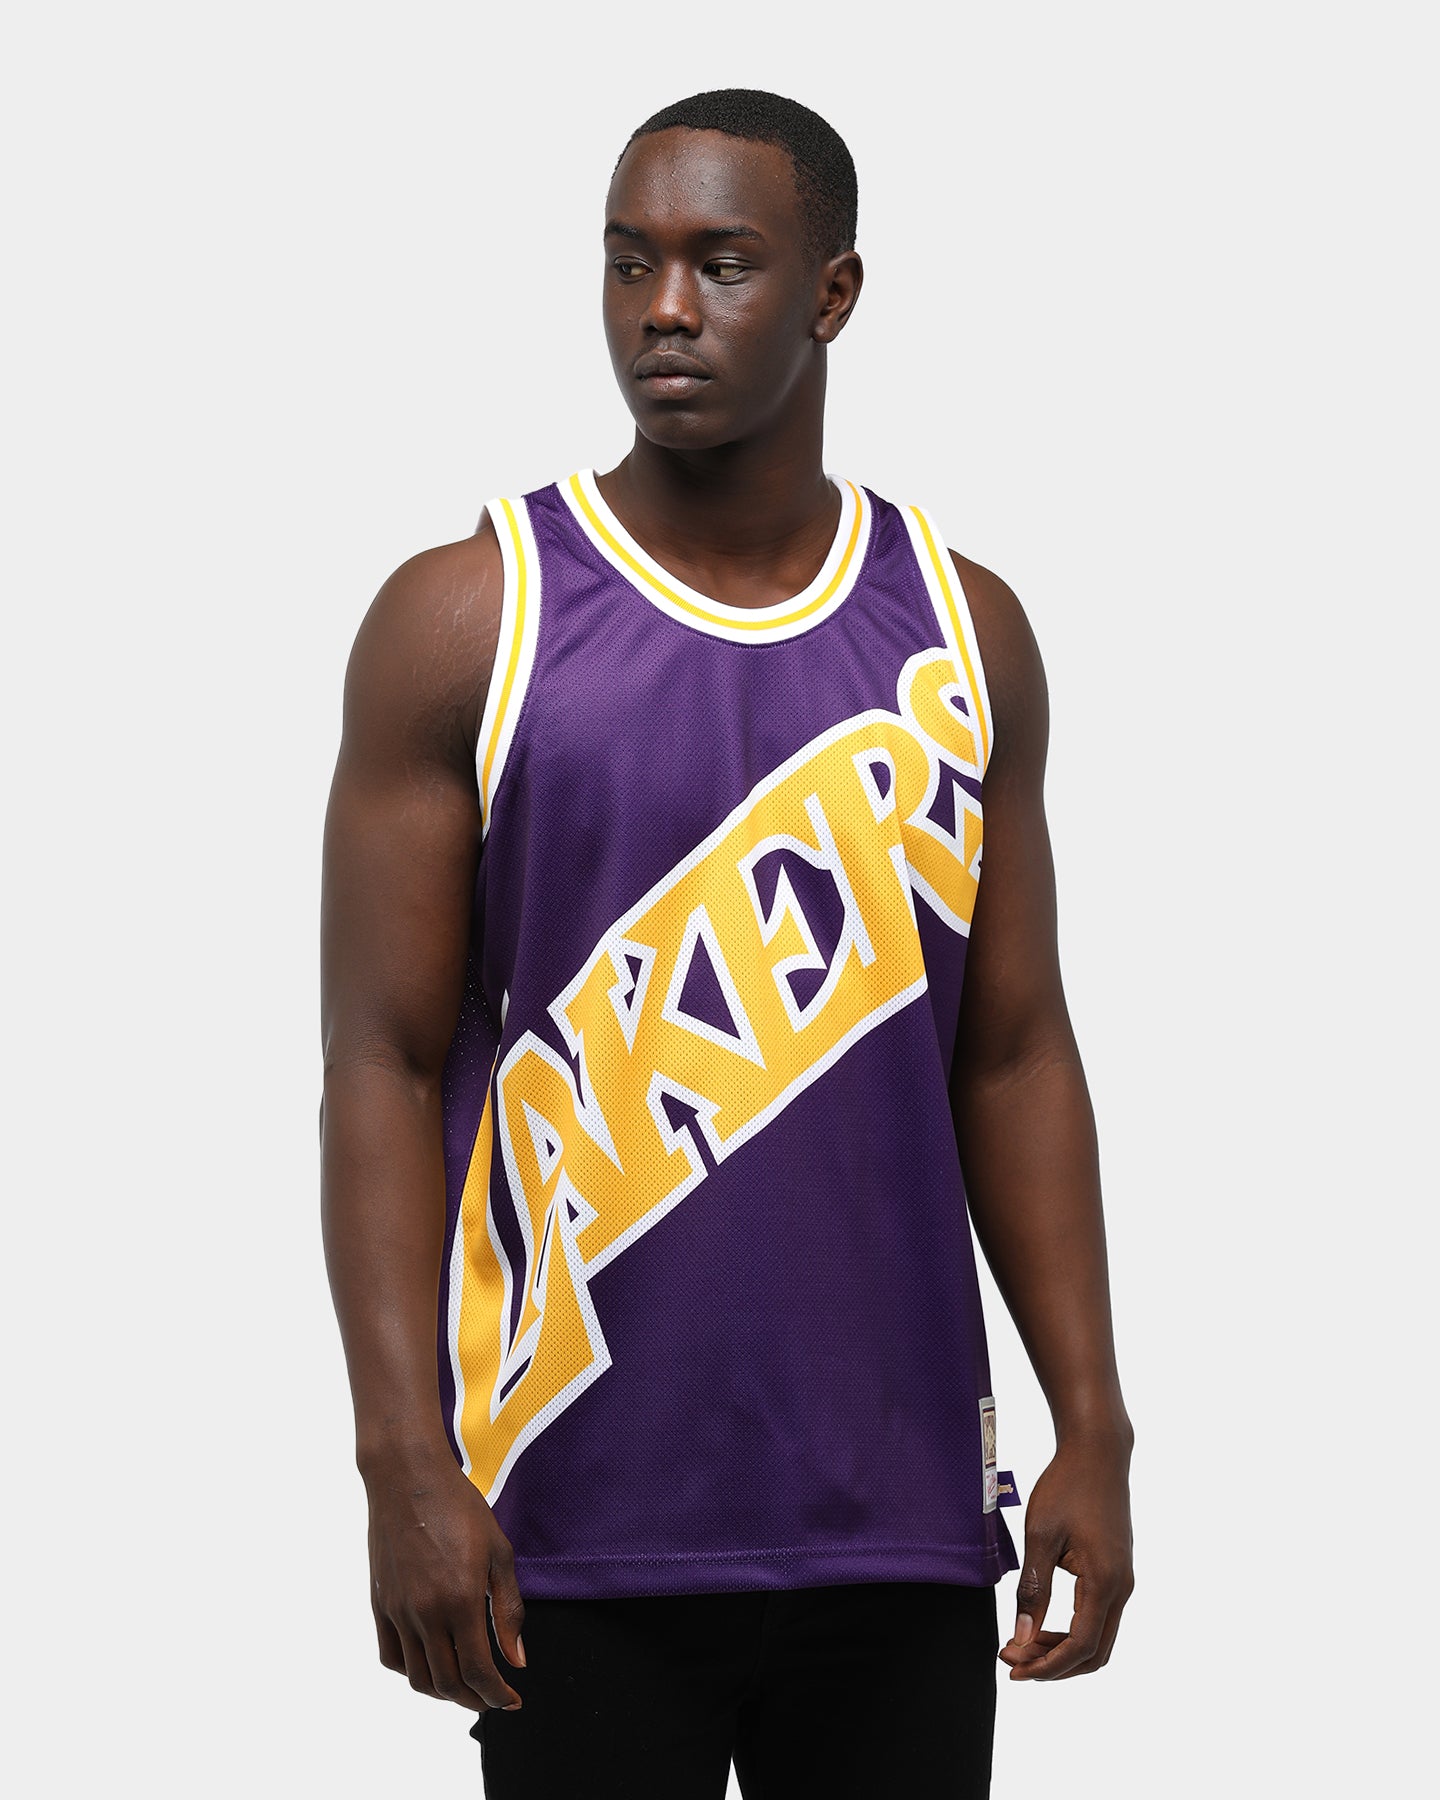 places that sell basketball jerseys